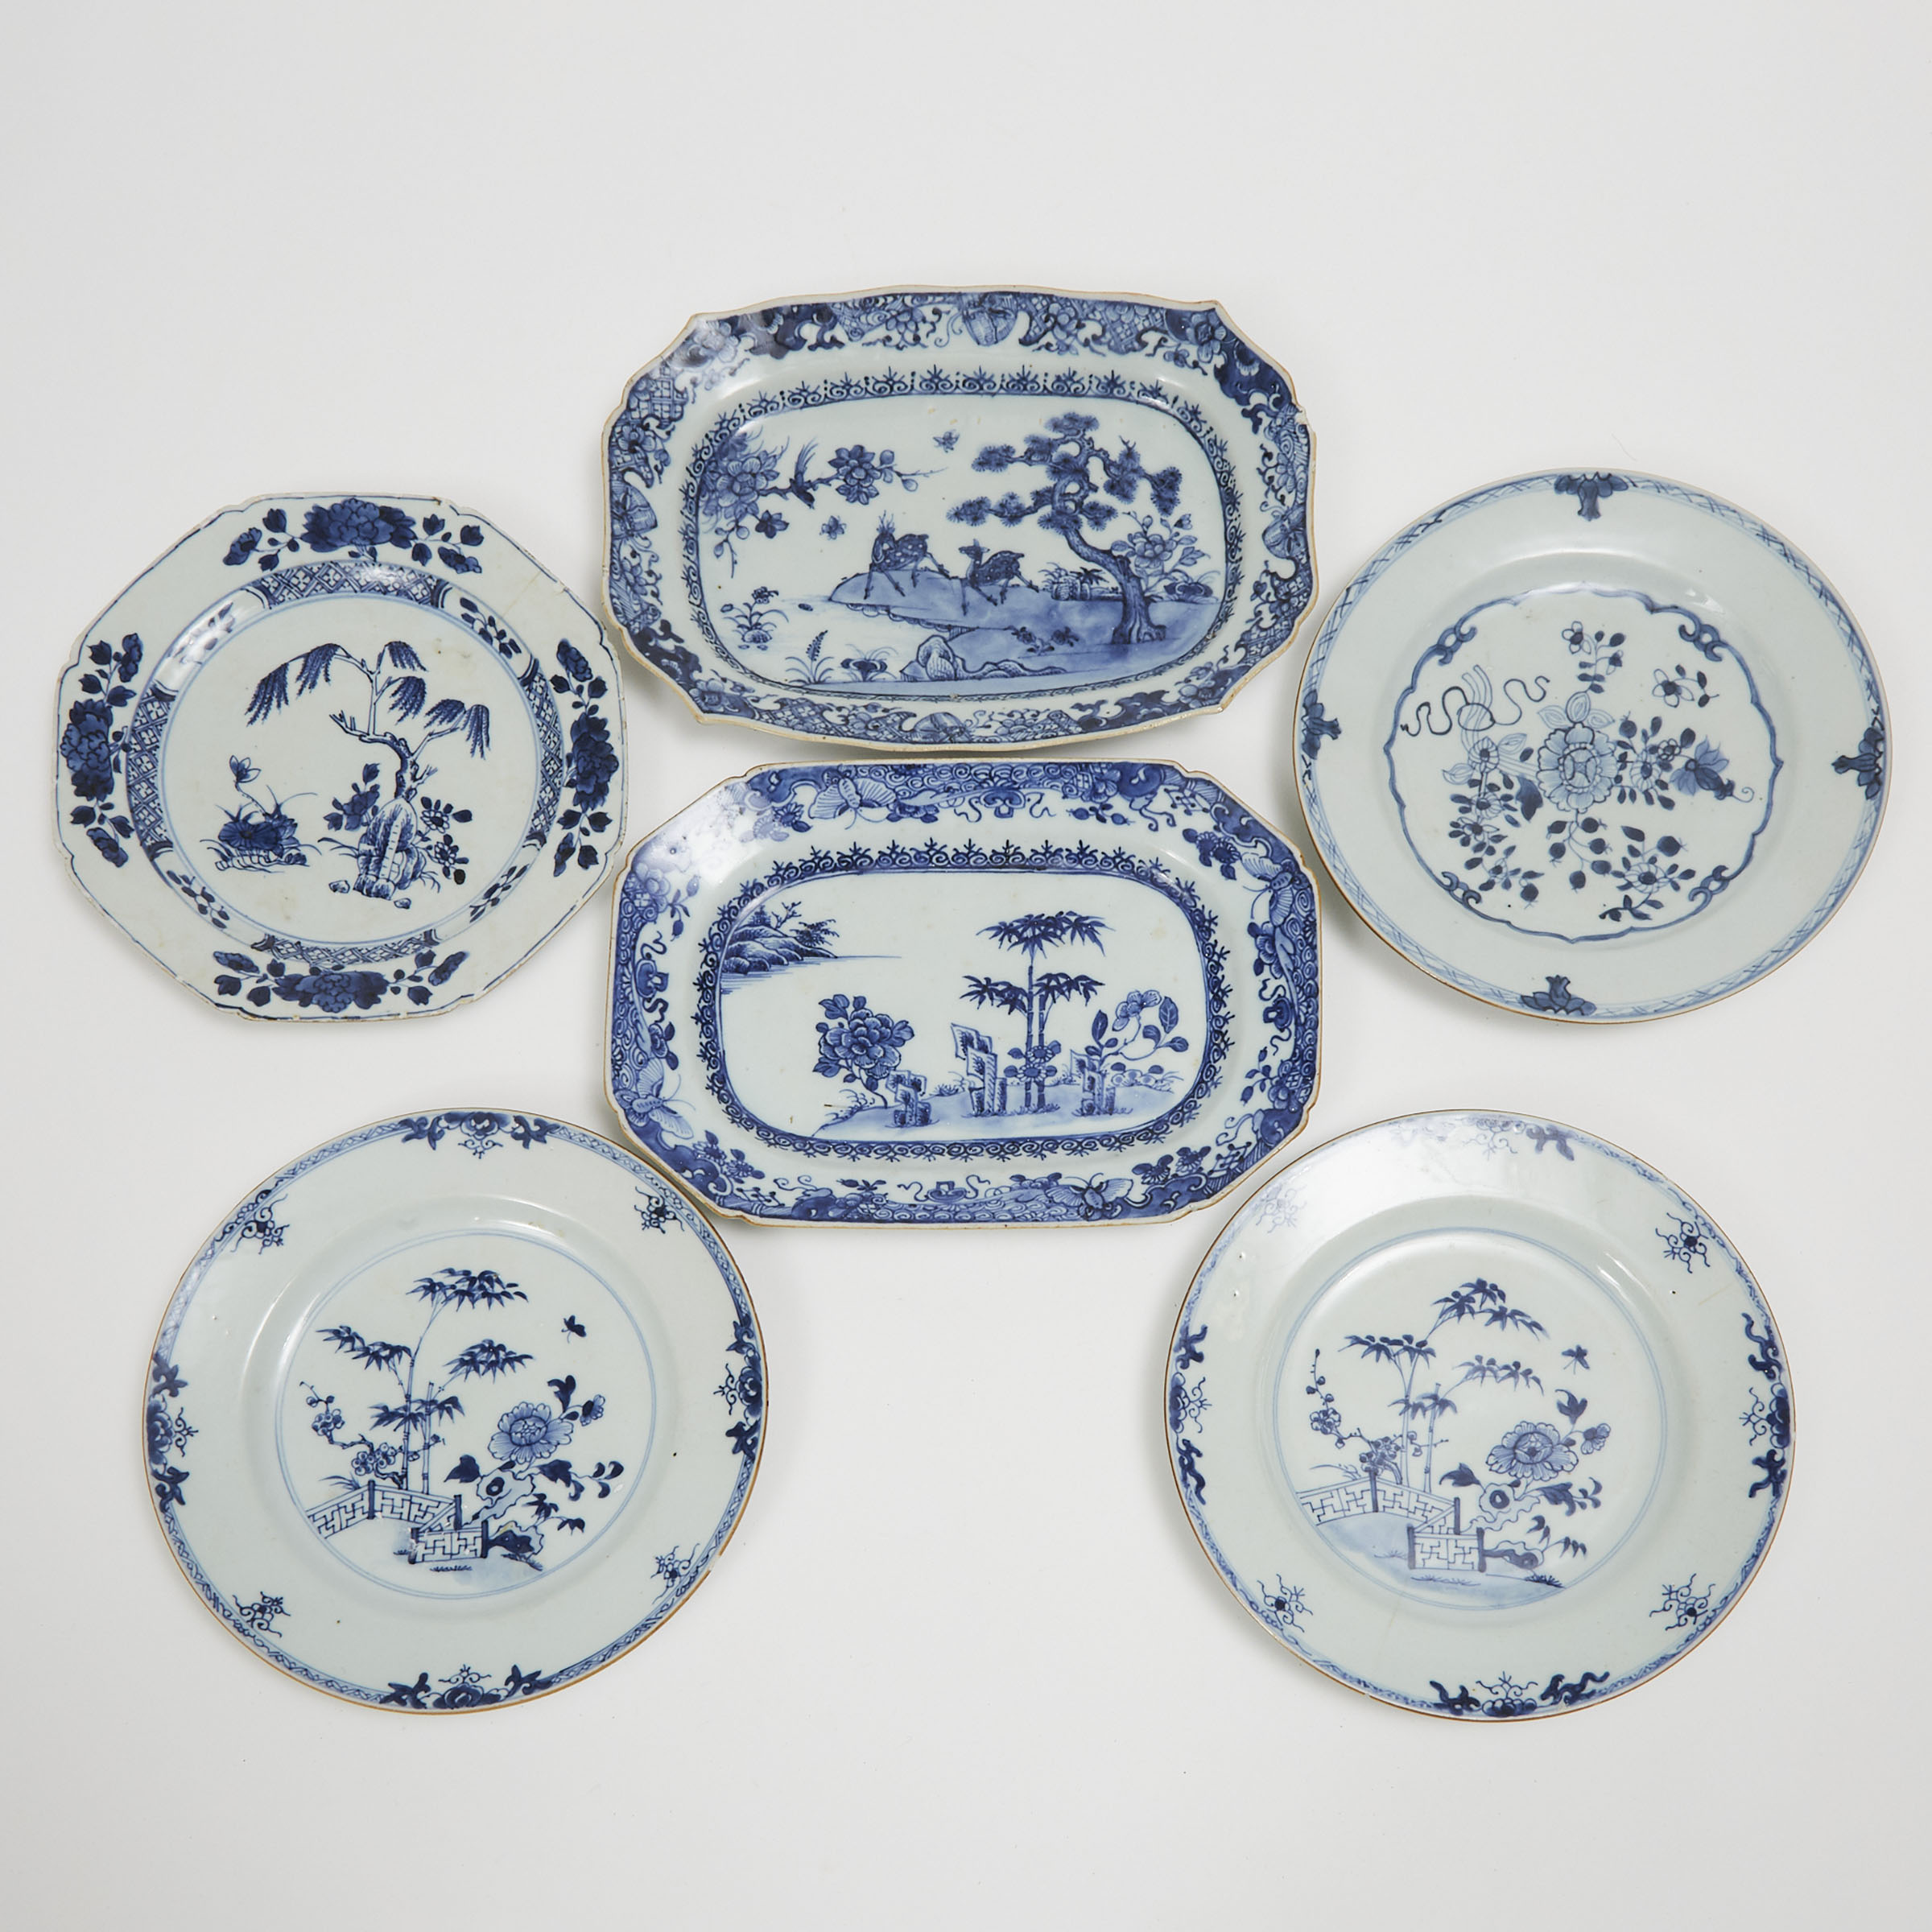 A Set of Six Blue and White Plates, 18th/19th Century